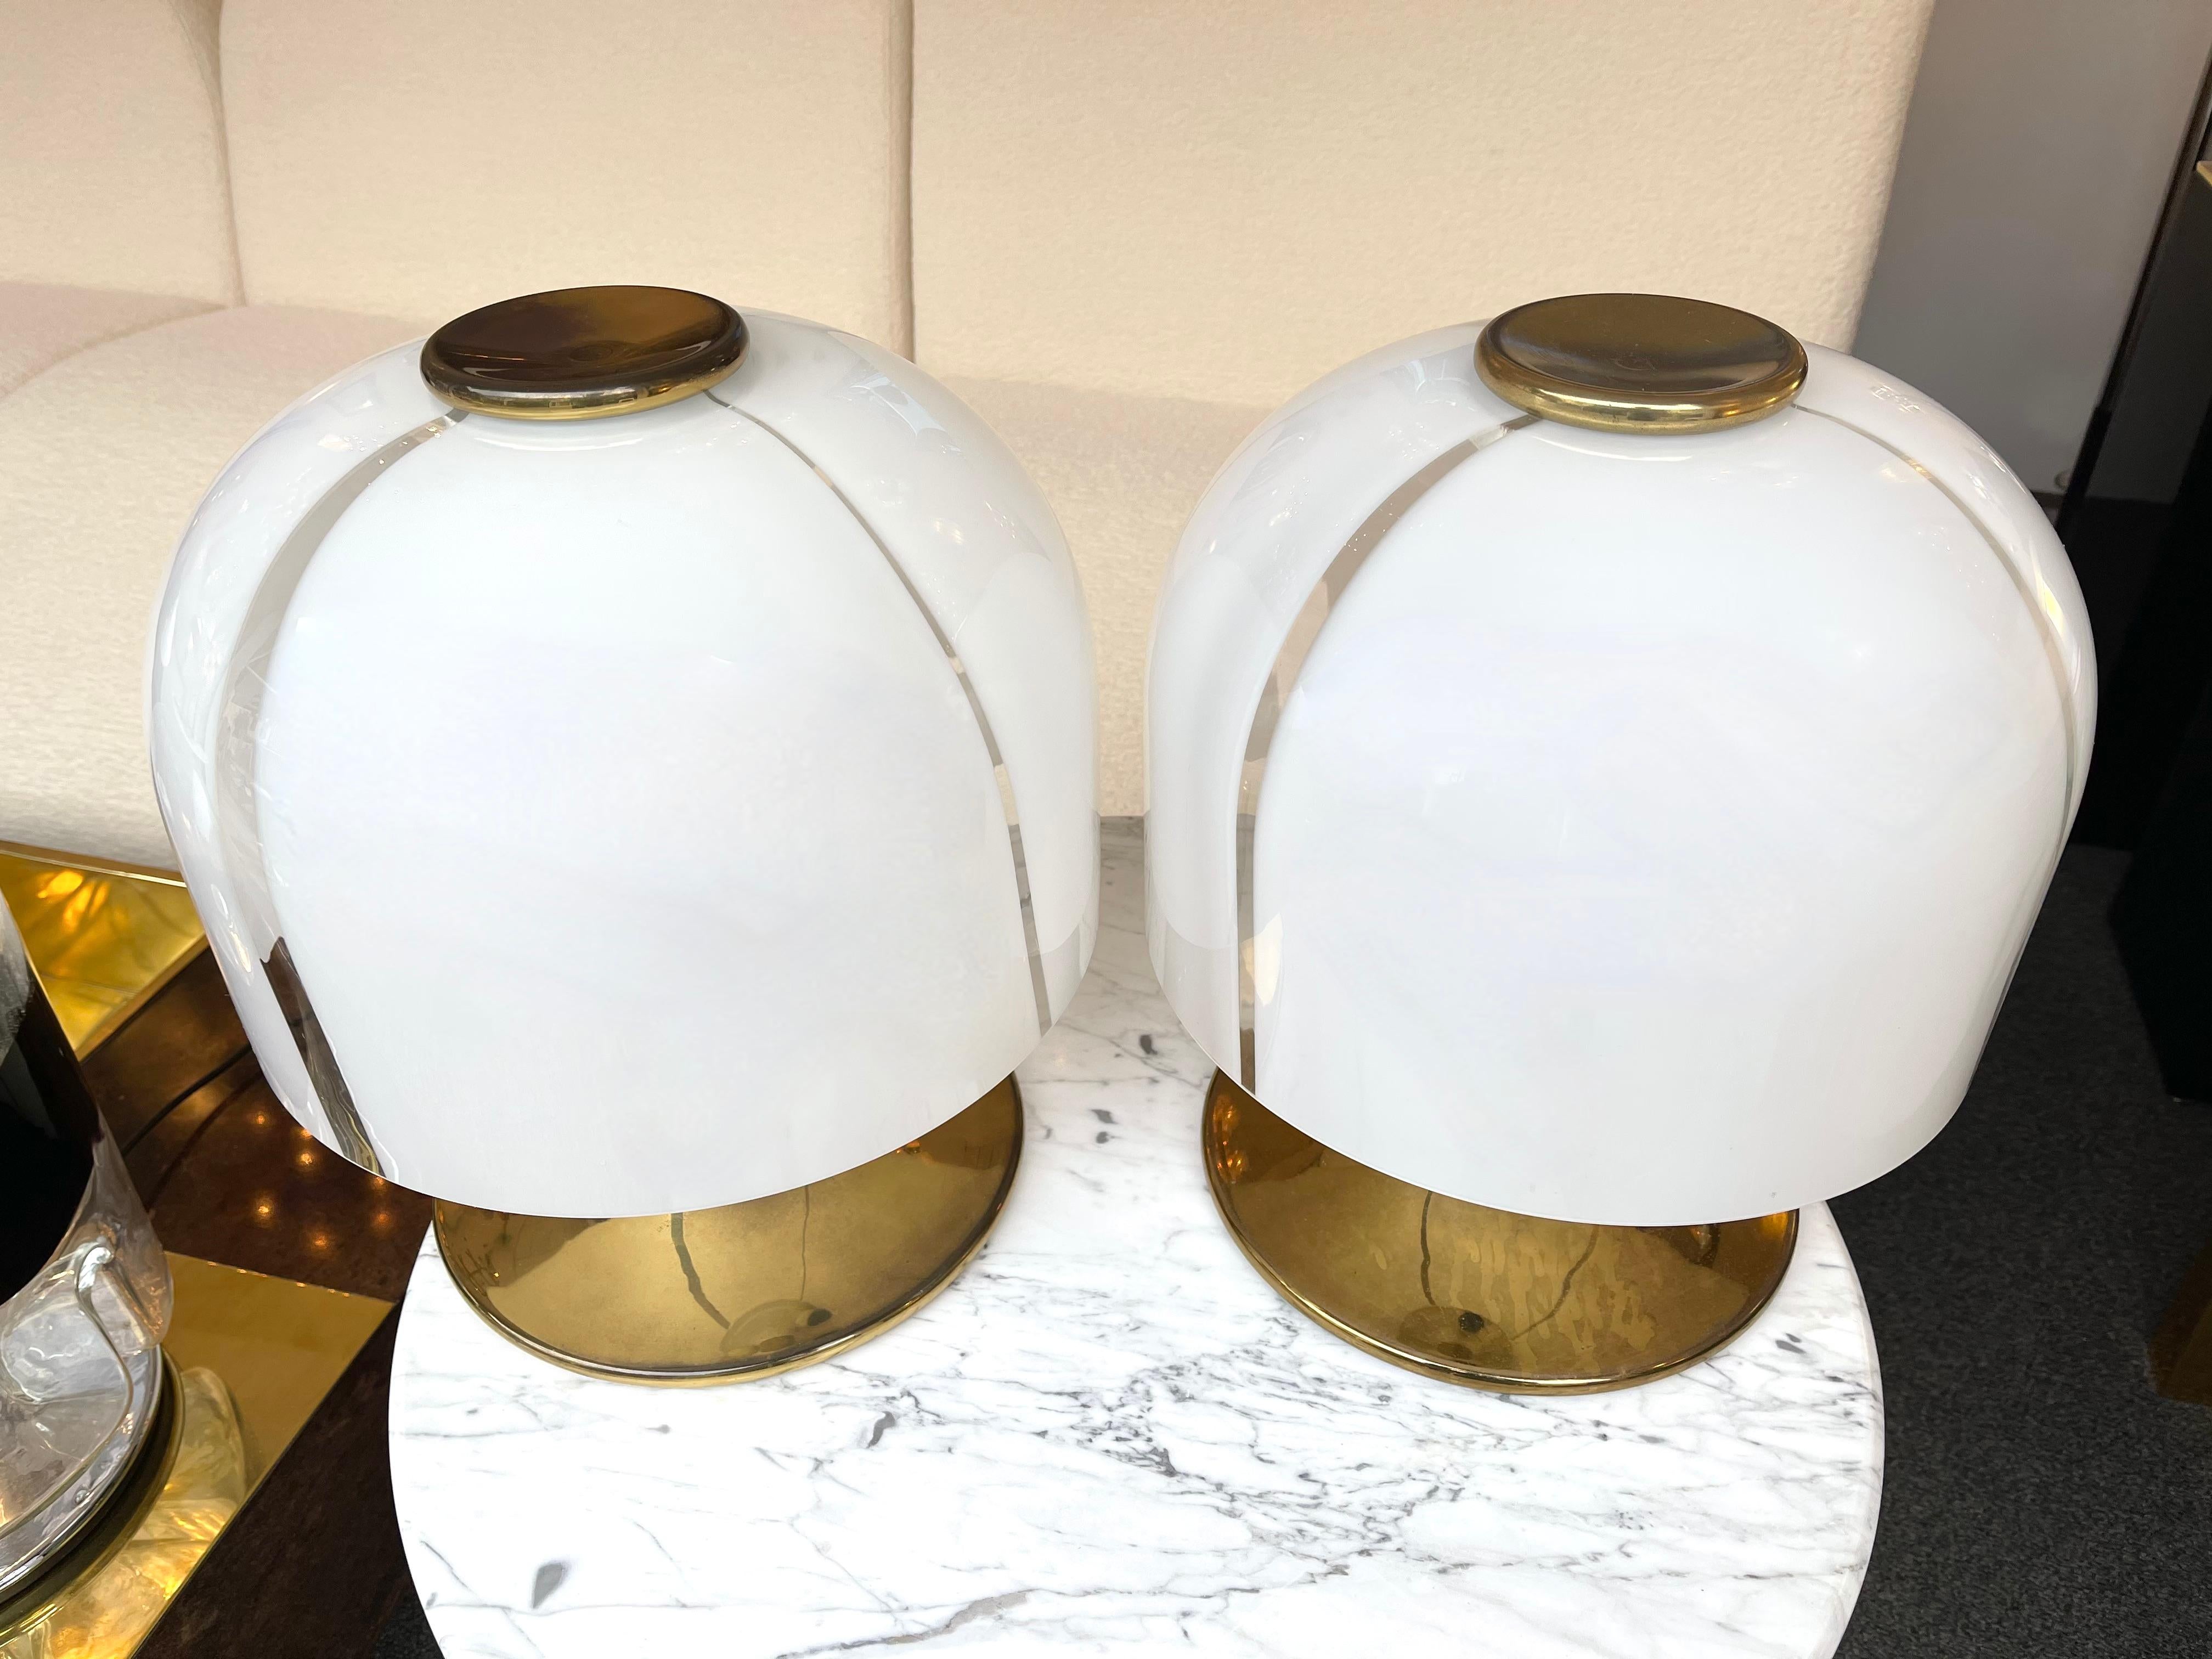 Pair of mushroom table or bedside lamps in brass and Murano glass by F. Fabbian. The large version of the model. Famous design like Mazzega, Venini, Vistosi, La Murrina, Poliarte.